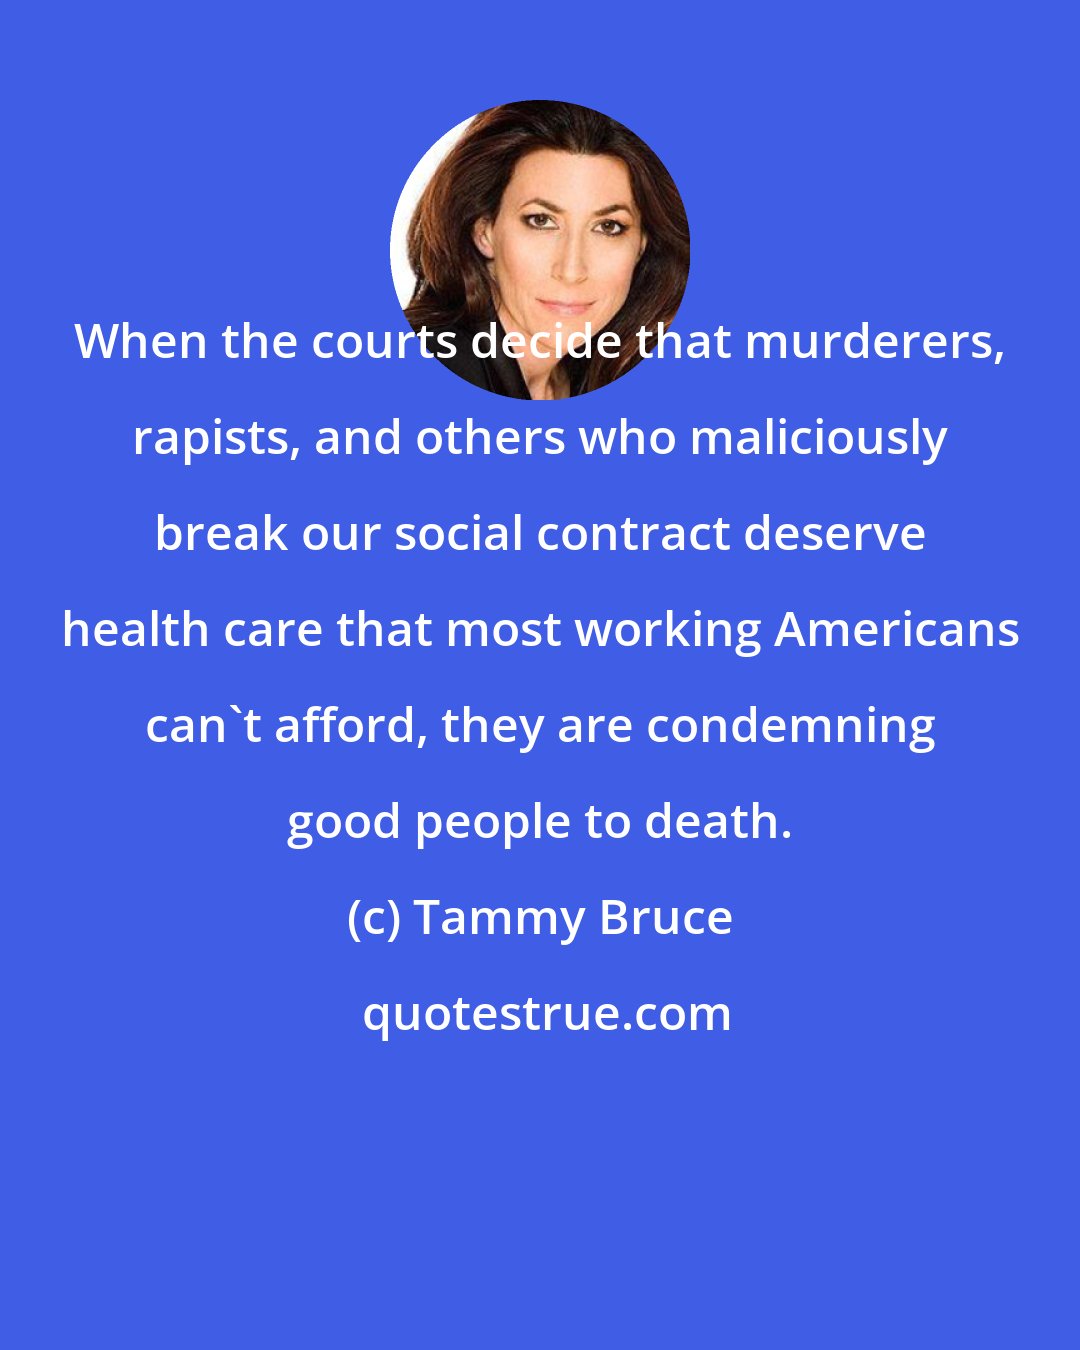 Tammy Bruce: When the courts decide that murderers, rapists, and others who maliciously break our social contract deserve health care that most working Americans can't afford, they are condemning good people to death.